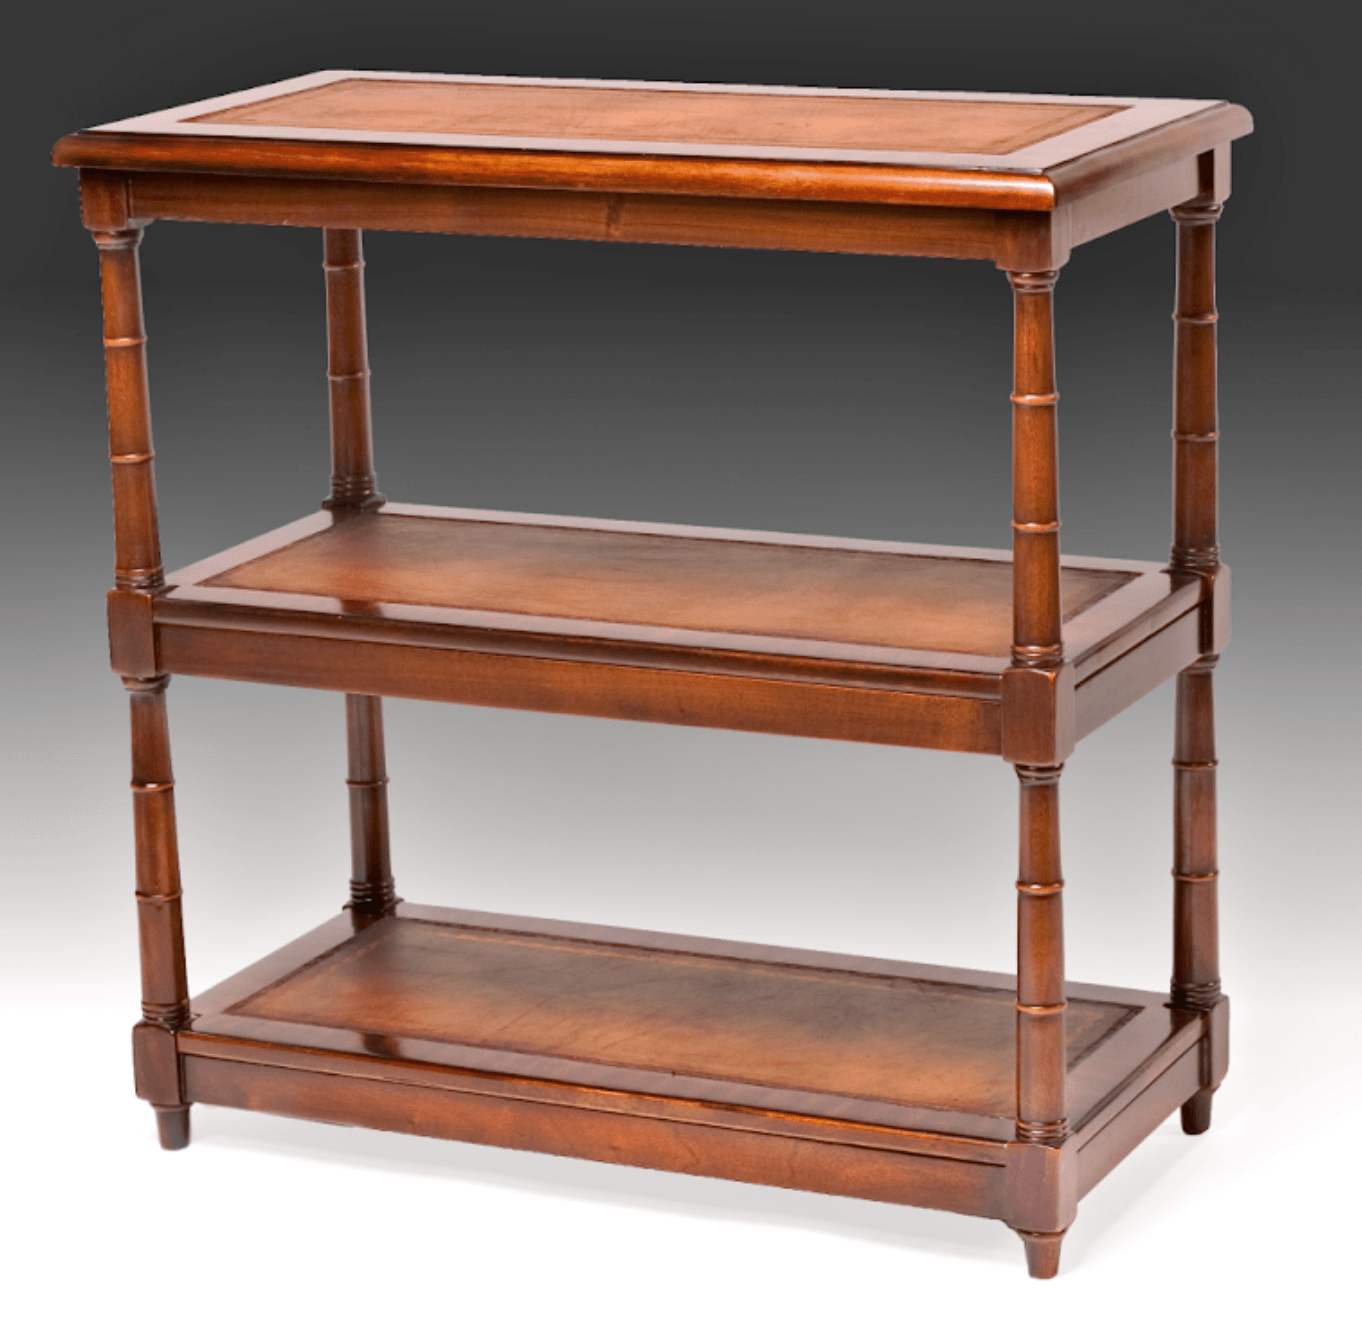 THREE TIER LEATHER TOP WHATNOT - House of Chippendale